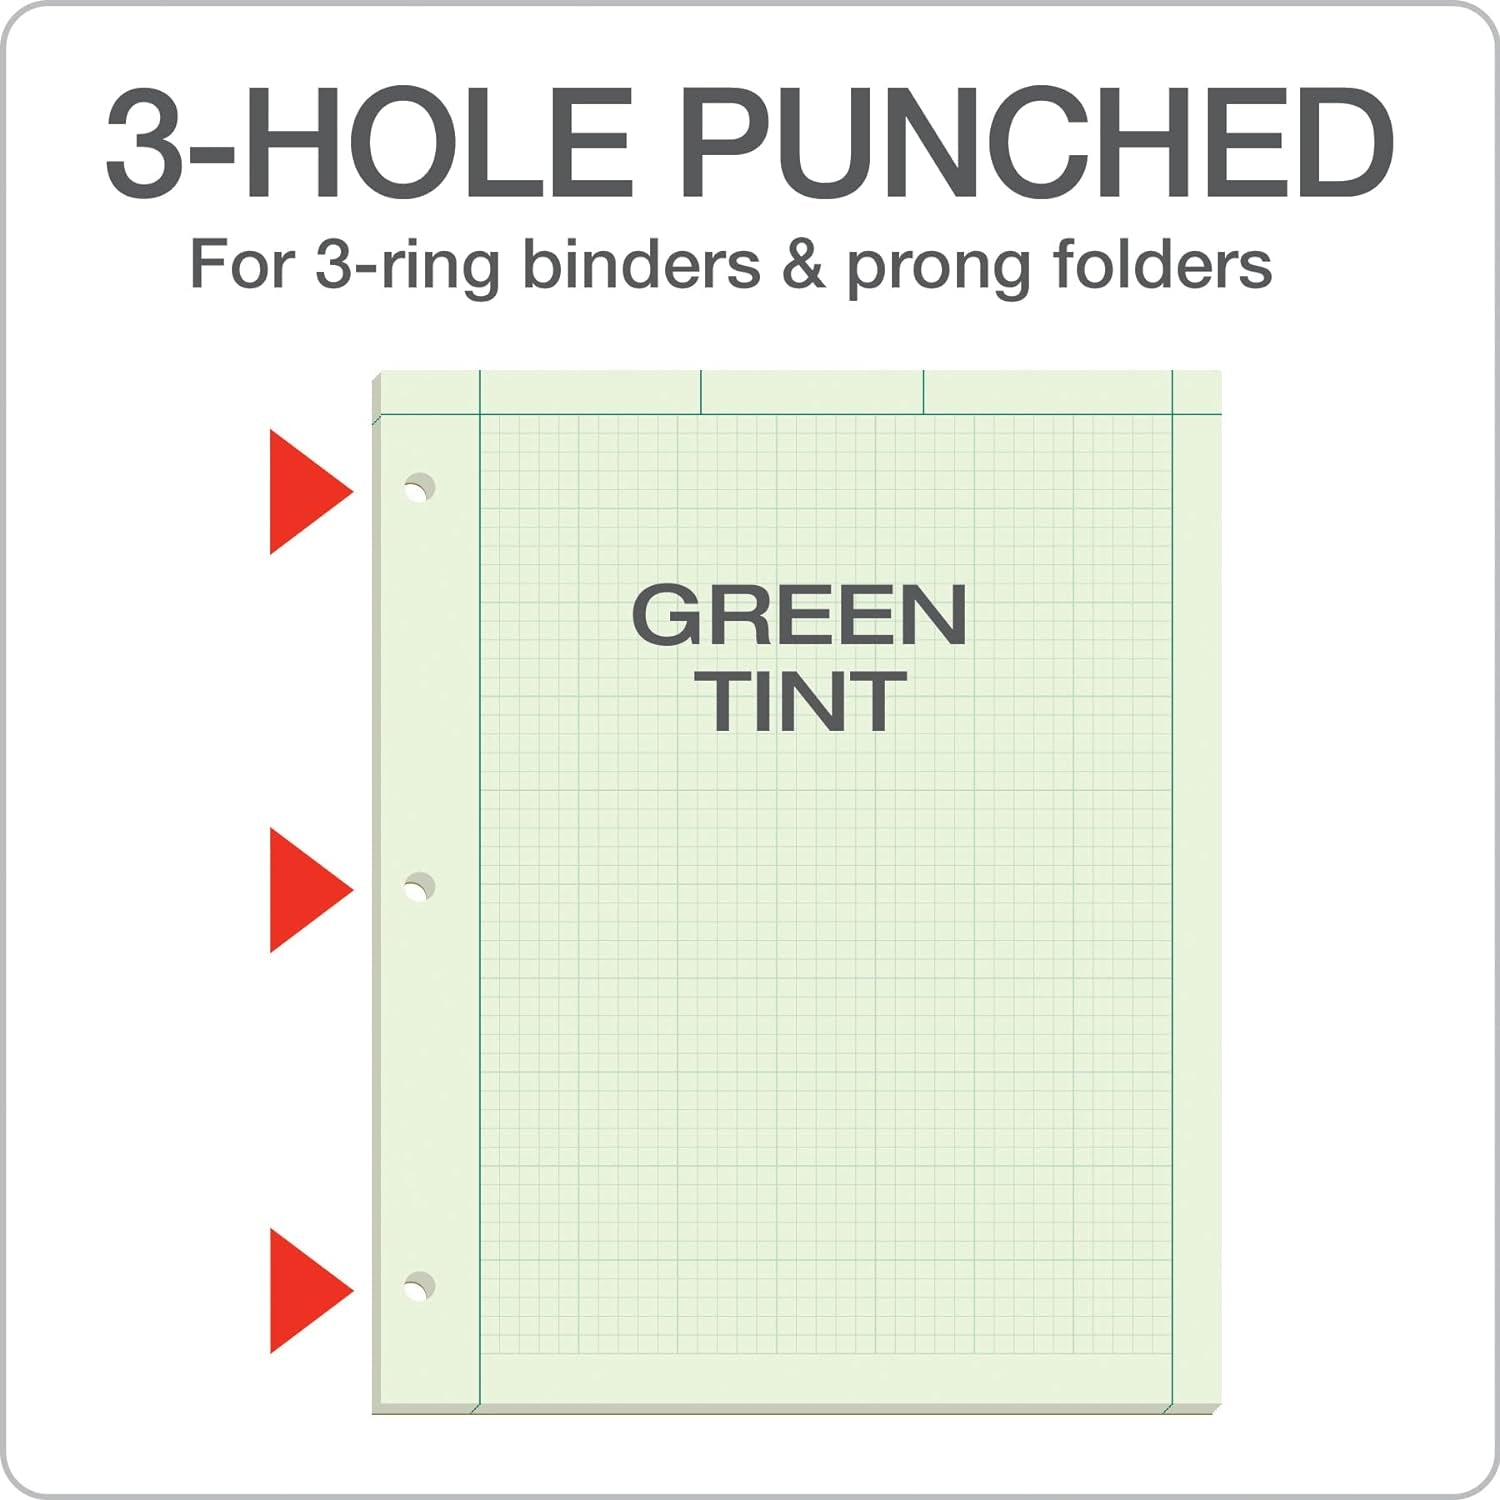 Engineering Computation Pads 3 Pk, 8-1/2" X 11", Glue, 5 X 5 Graph Rule on Back, Green Tint Paper, 3-Hole Punched, 100 Sheets per Pad (35507A)